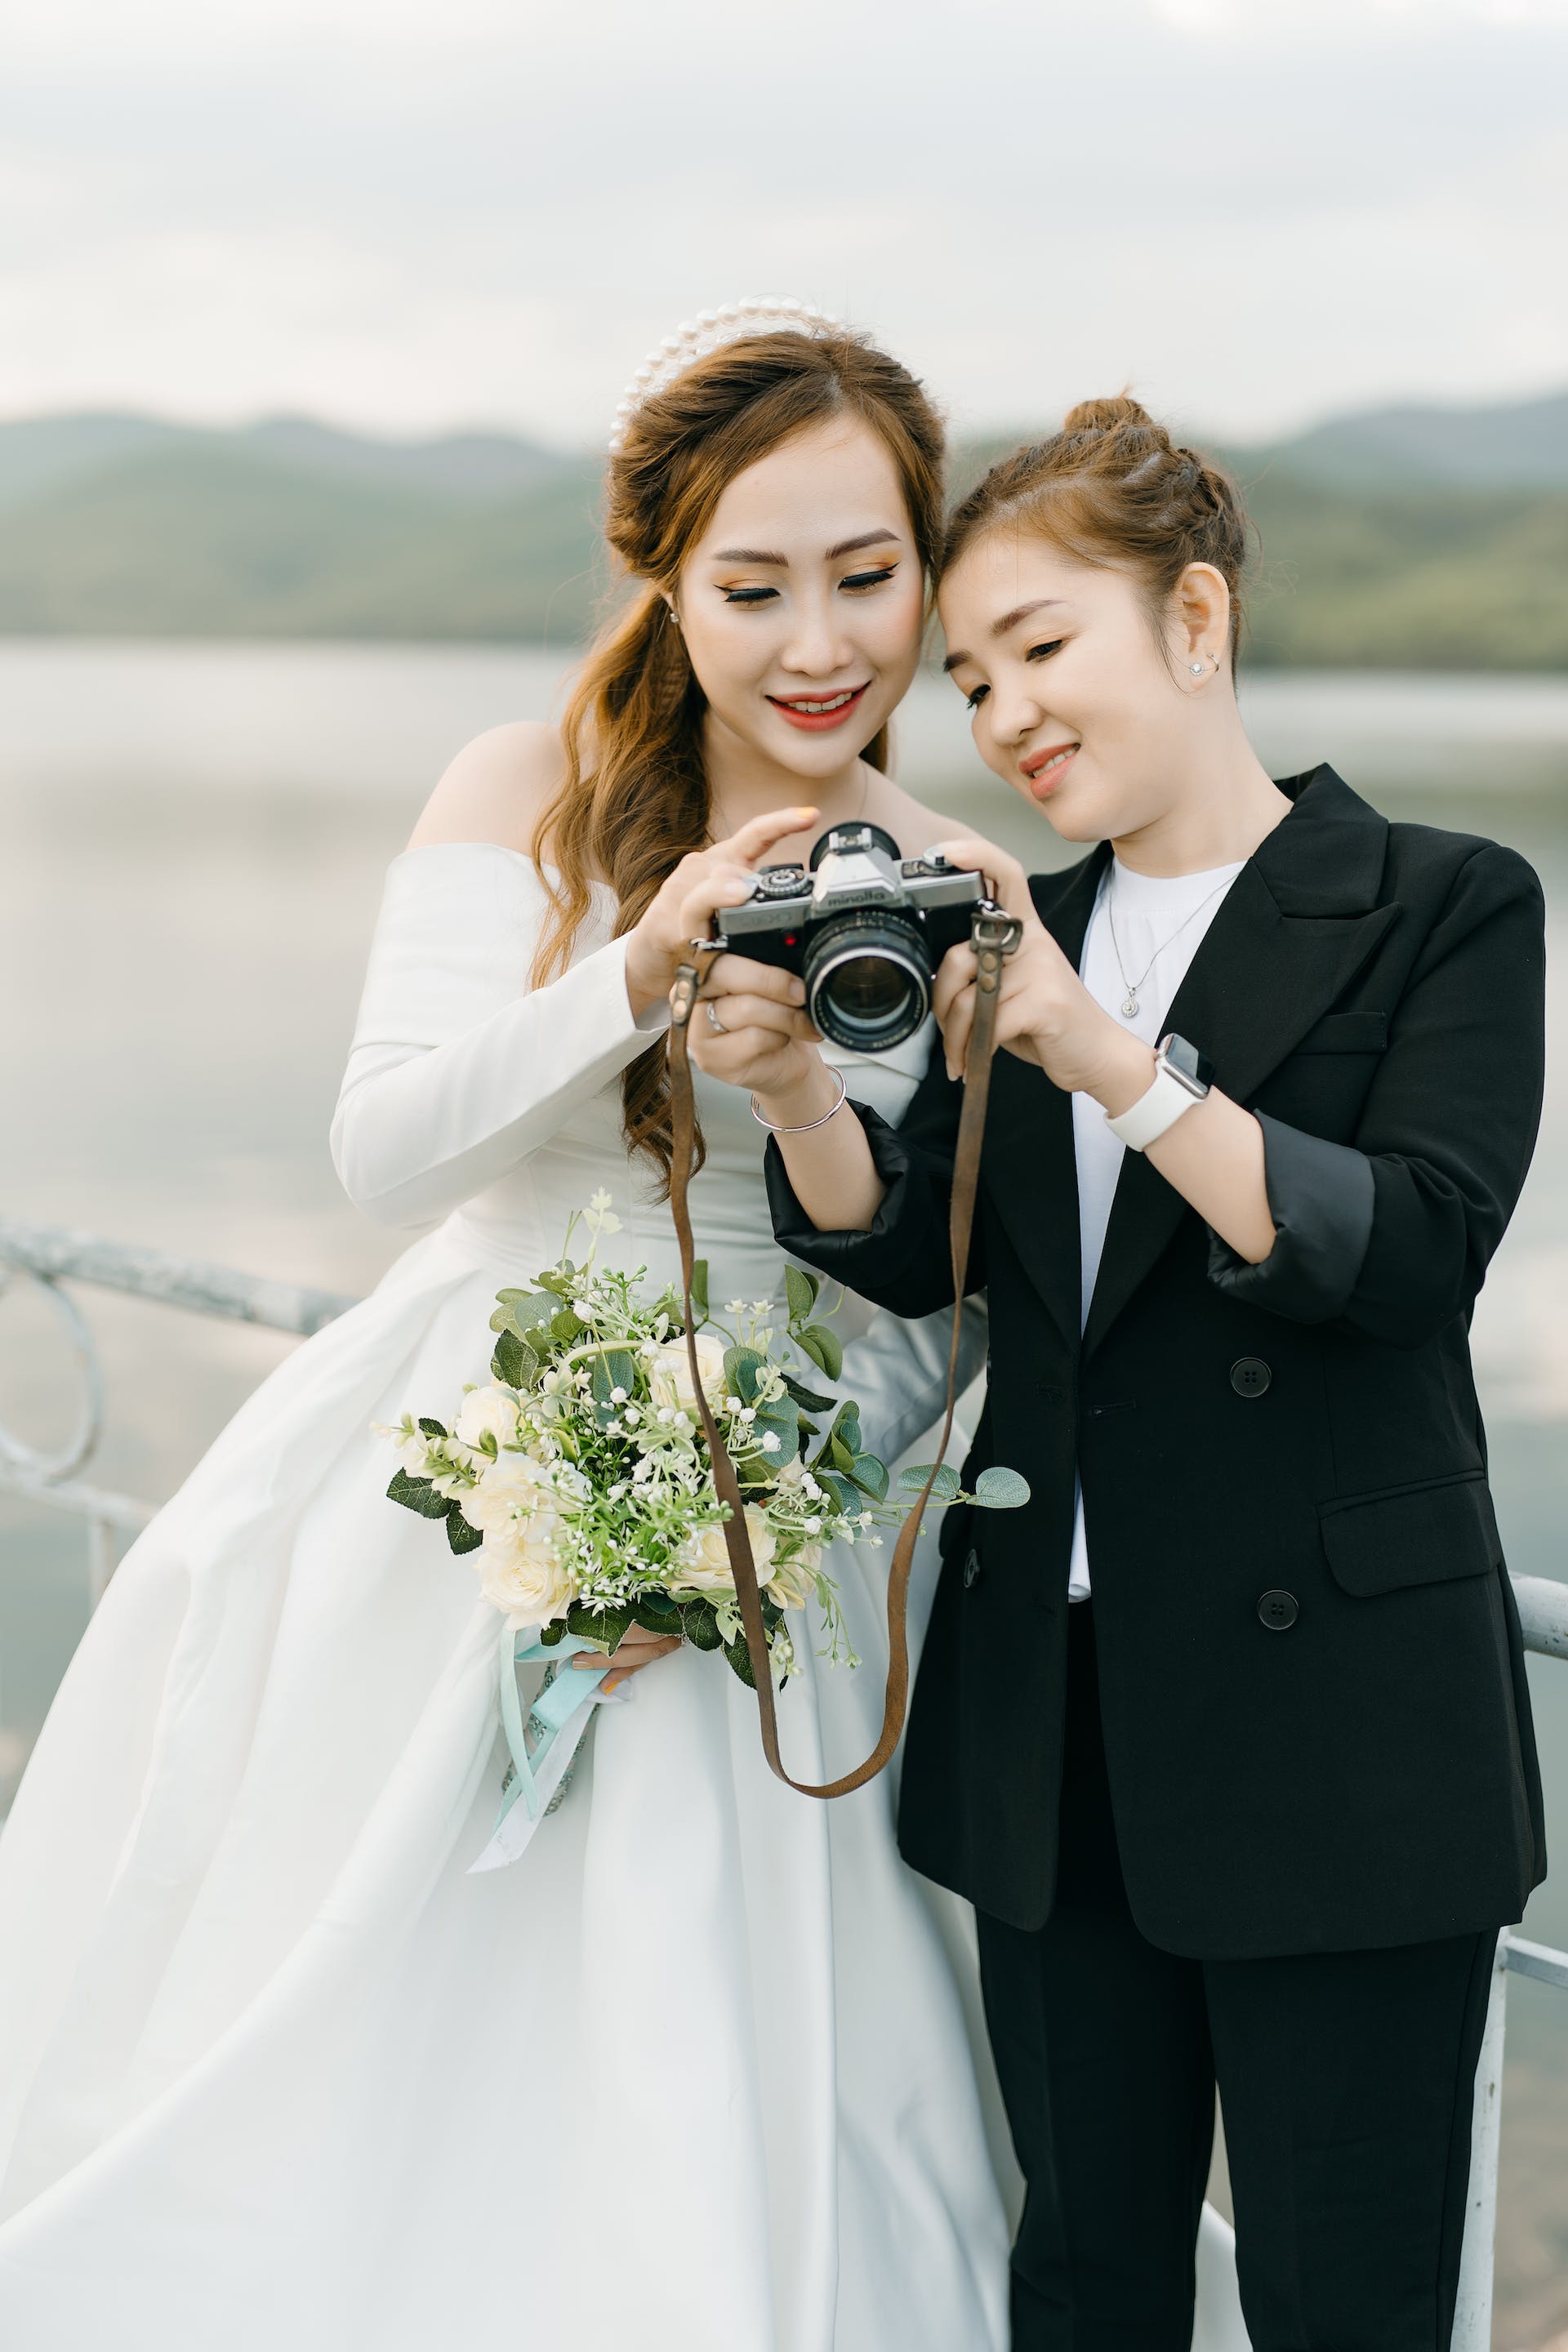 A photographer showing photos to a bride | Source: Pexels